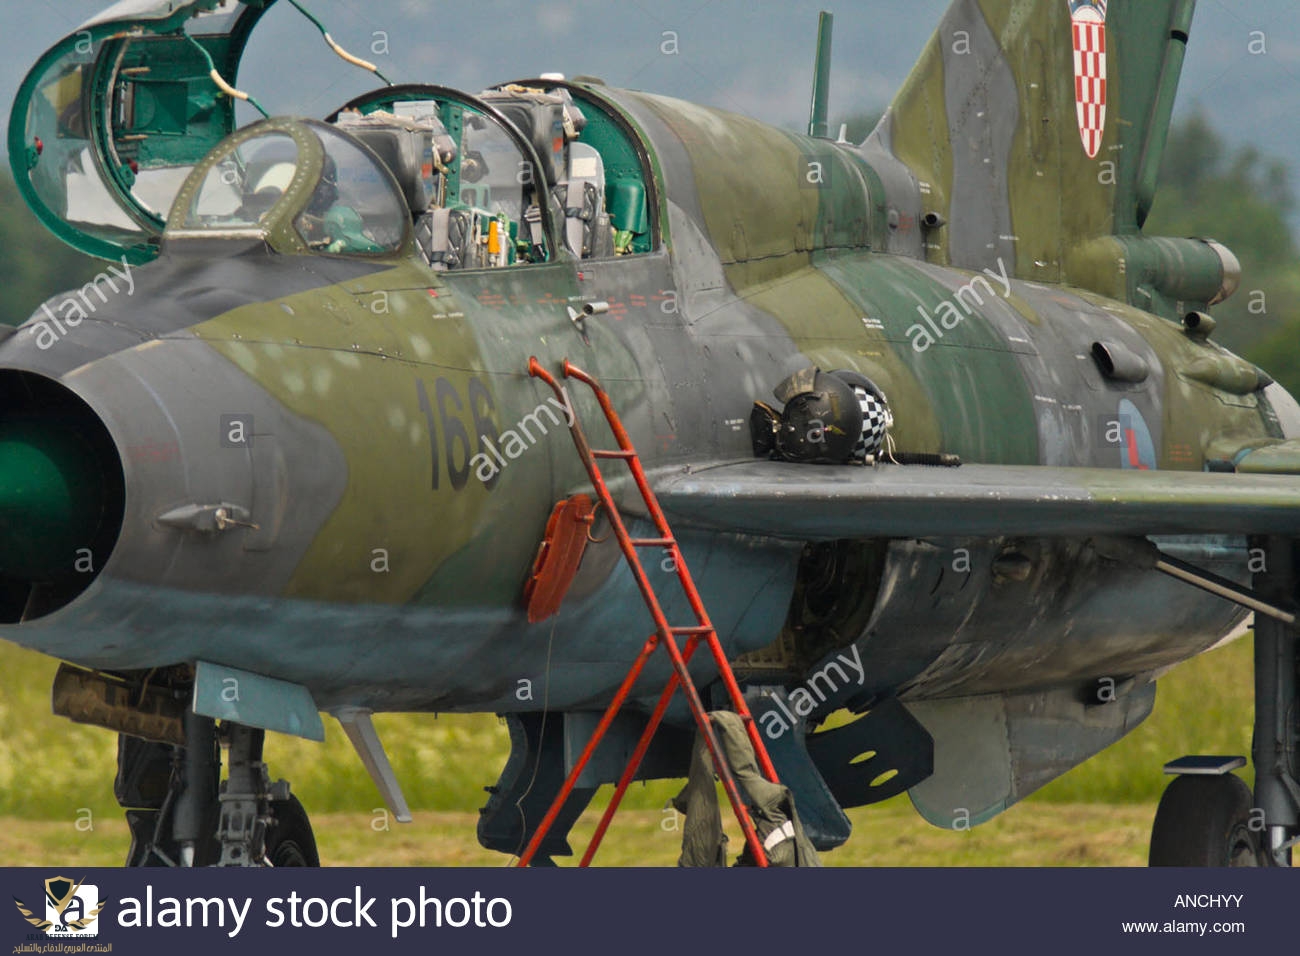 croatian-air-force-mig-21-umd-166-two-seater-trainer-closeup-cockpit-ANCHYY.jpg